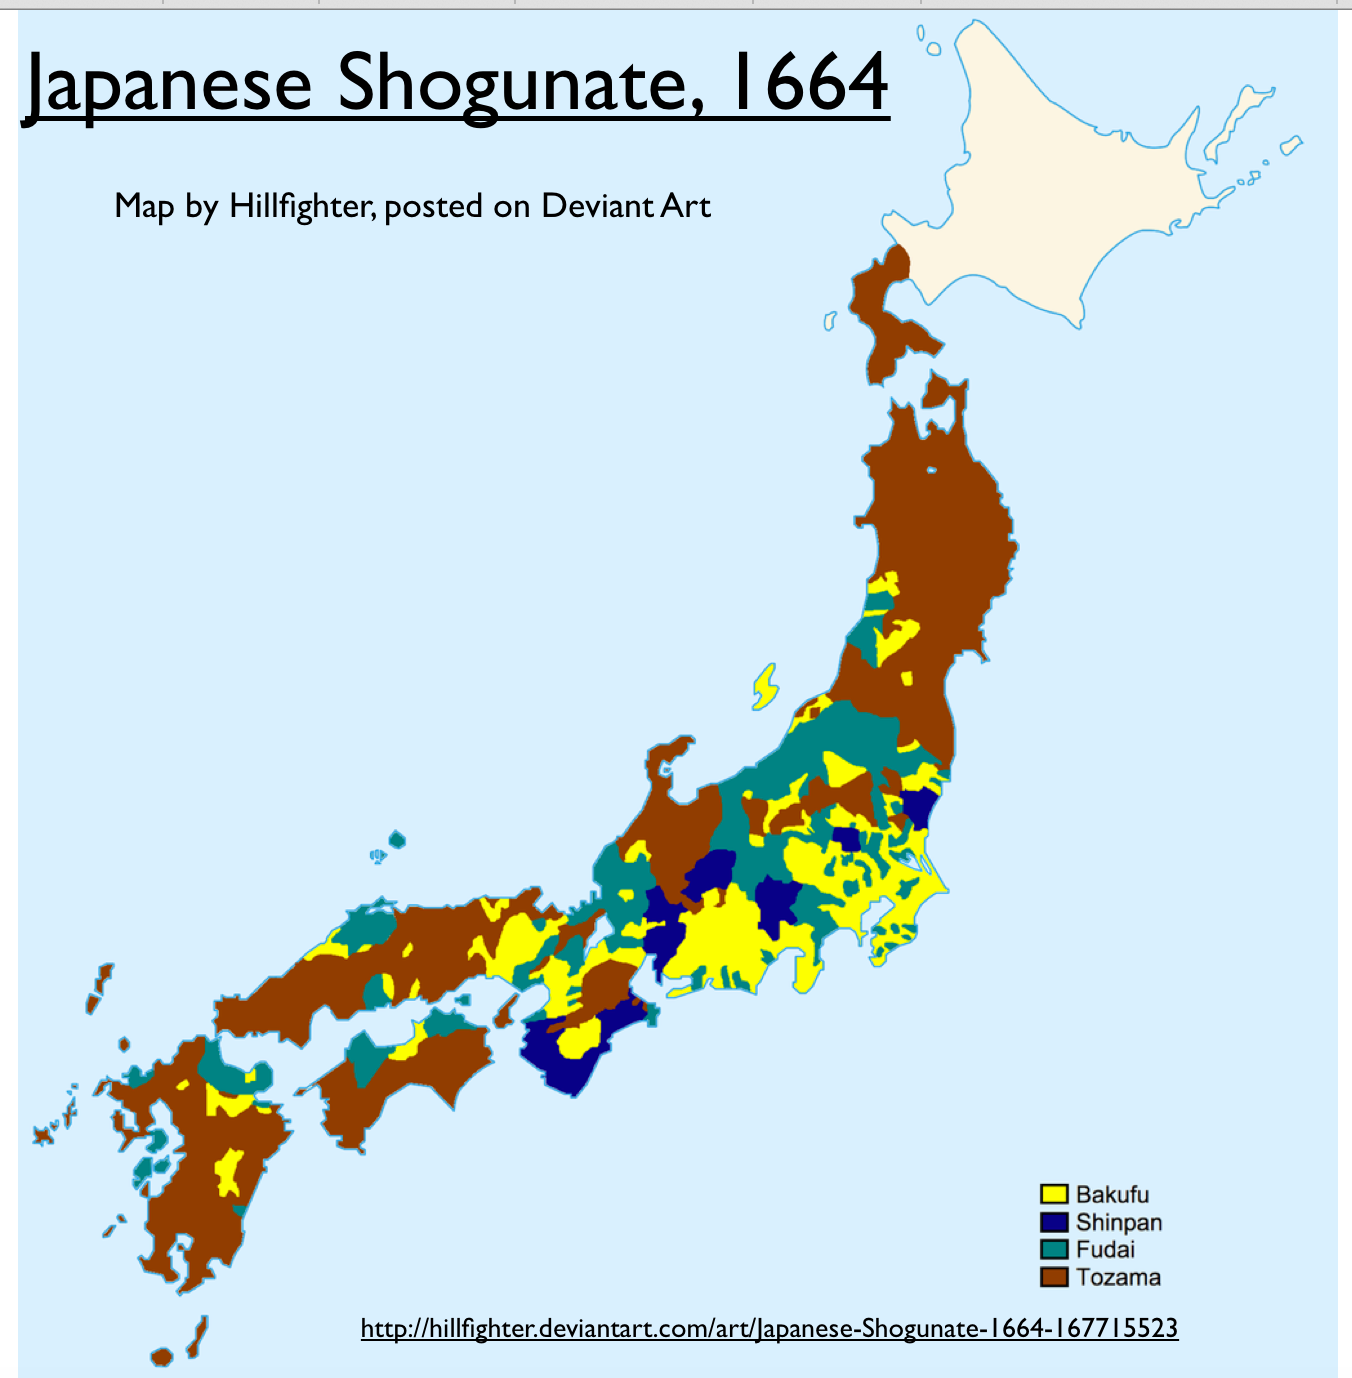 Mapping Early Modern Japan as a Multi-State System | GeoCurrents